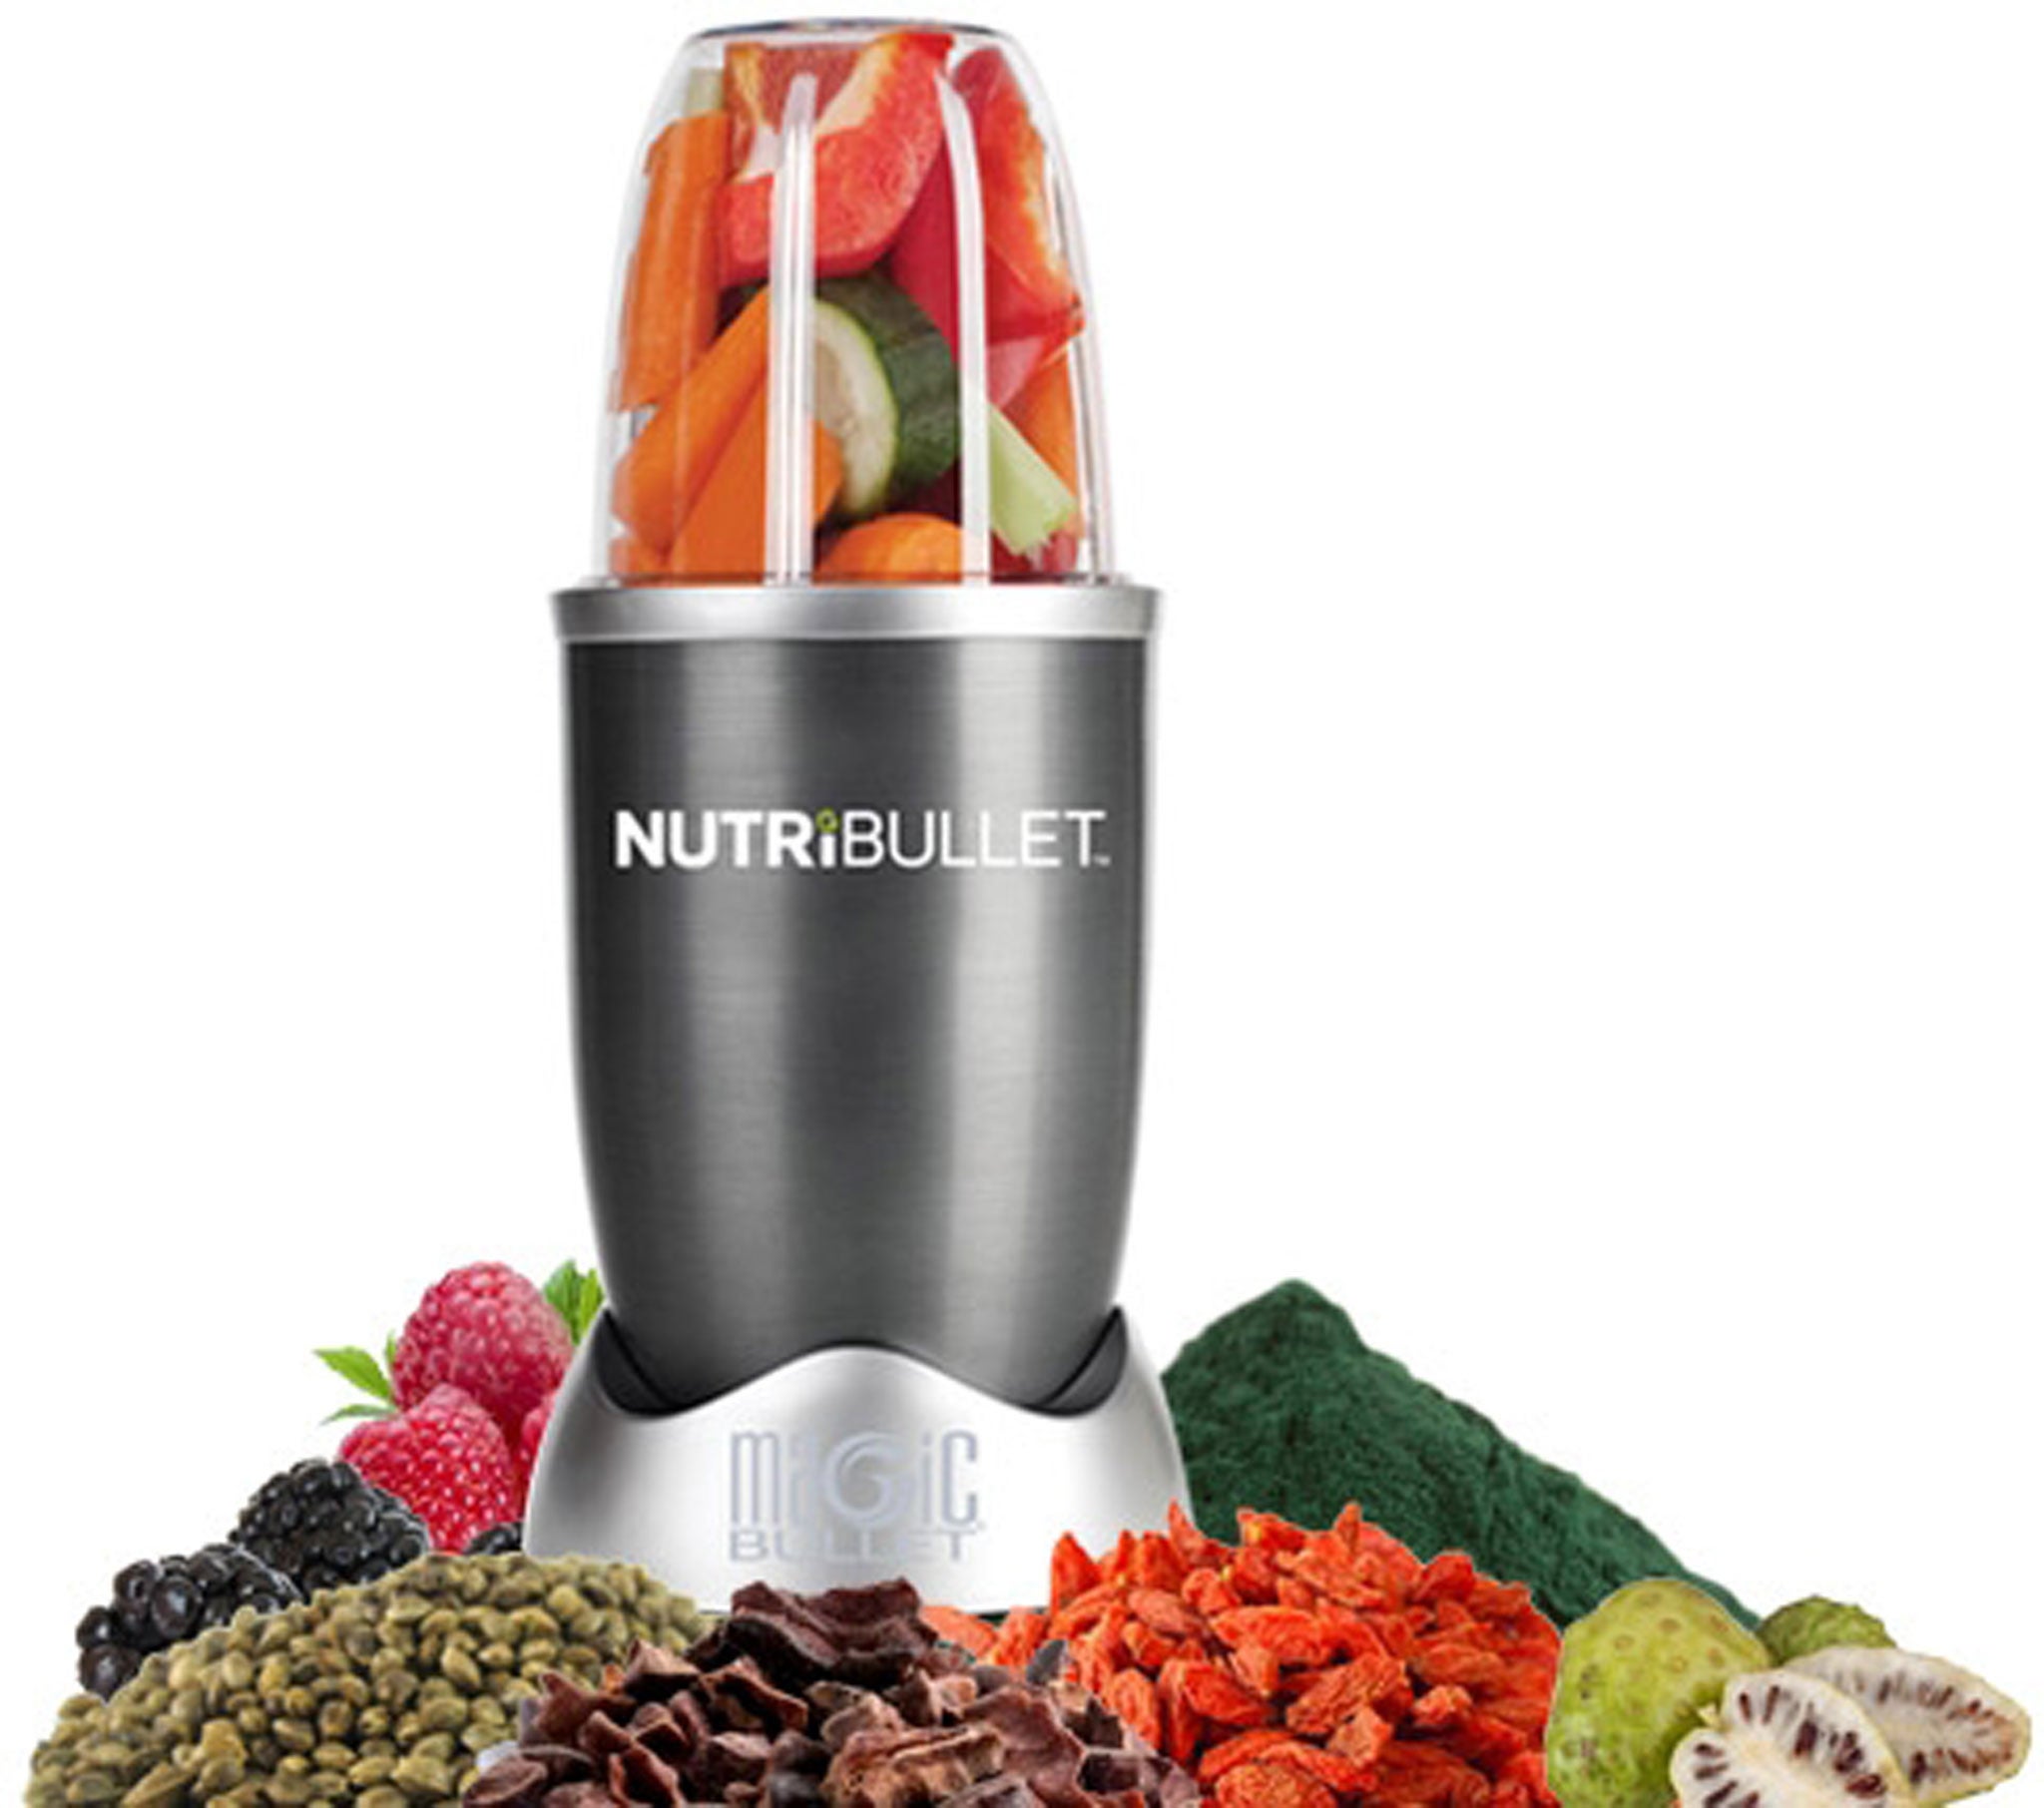 6. NutriBullet This powerful juicer makes short work of even the hardest fruit and veg, giving your fuss-free smoothies in a trice. £99.95, selfridges.com